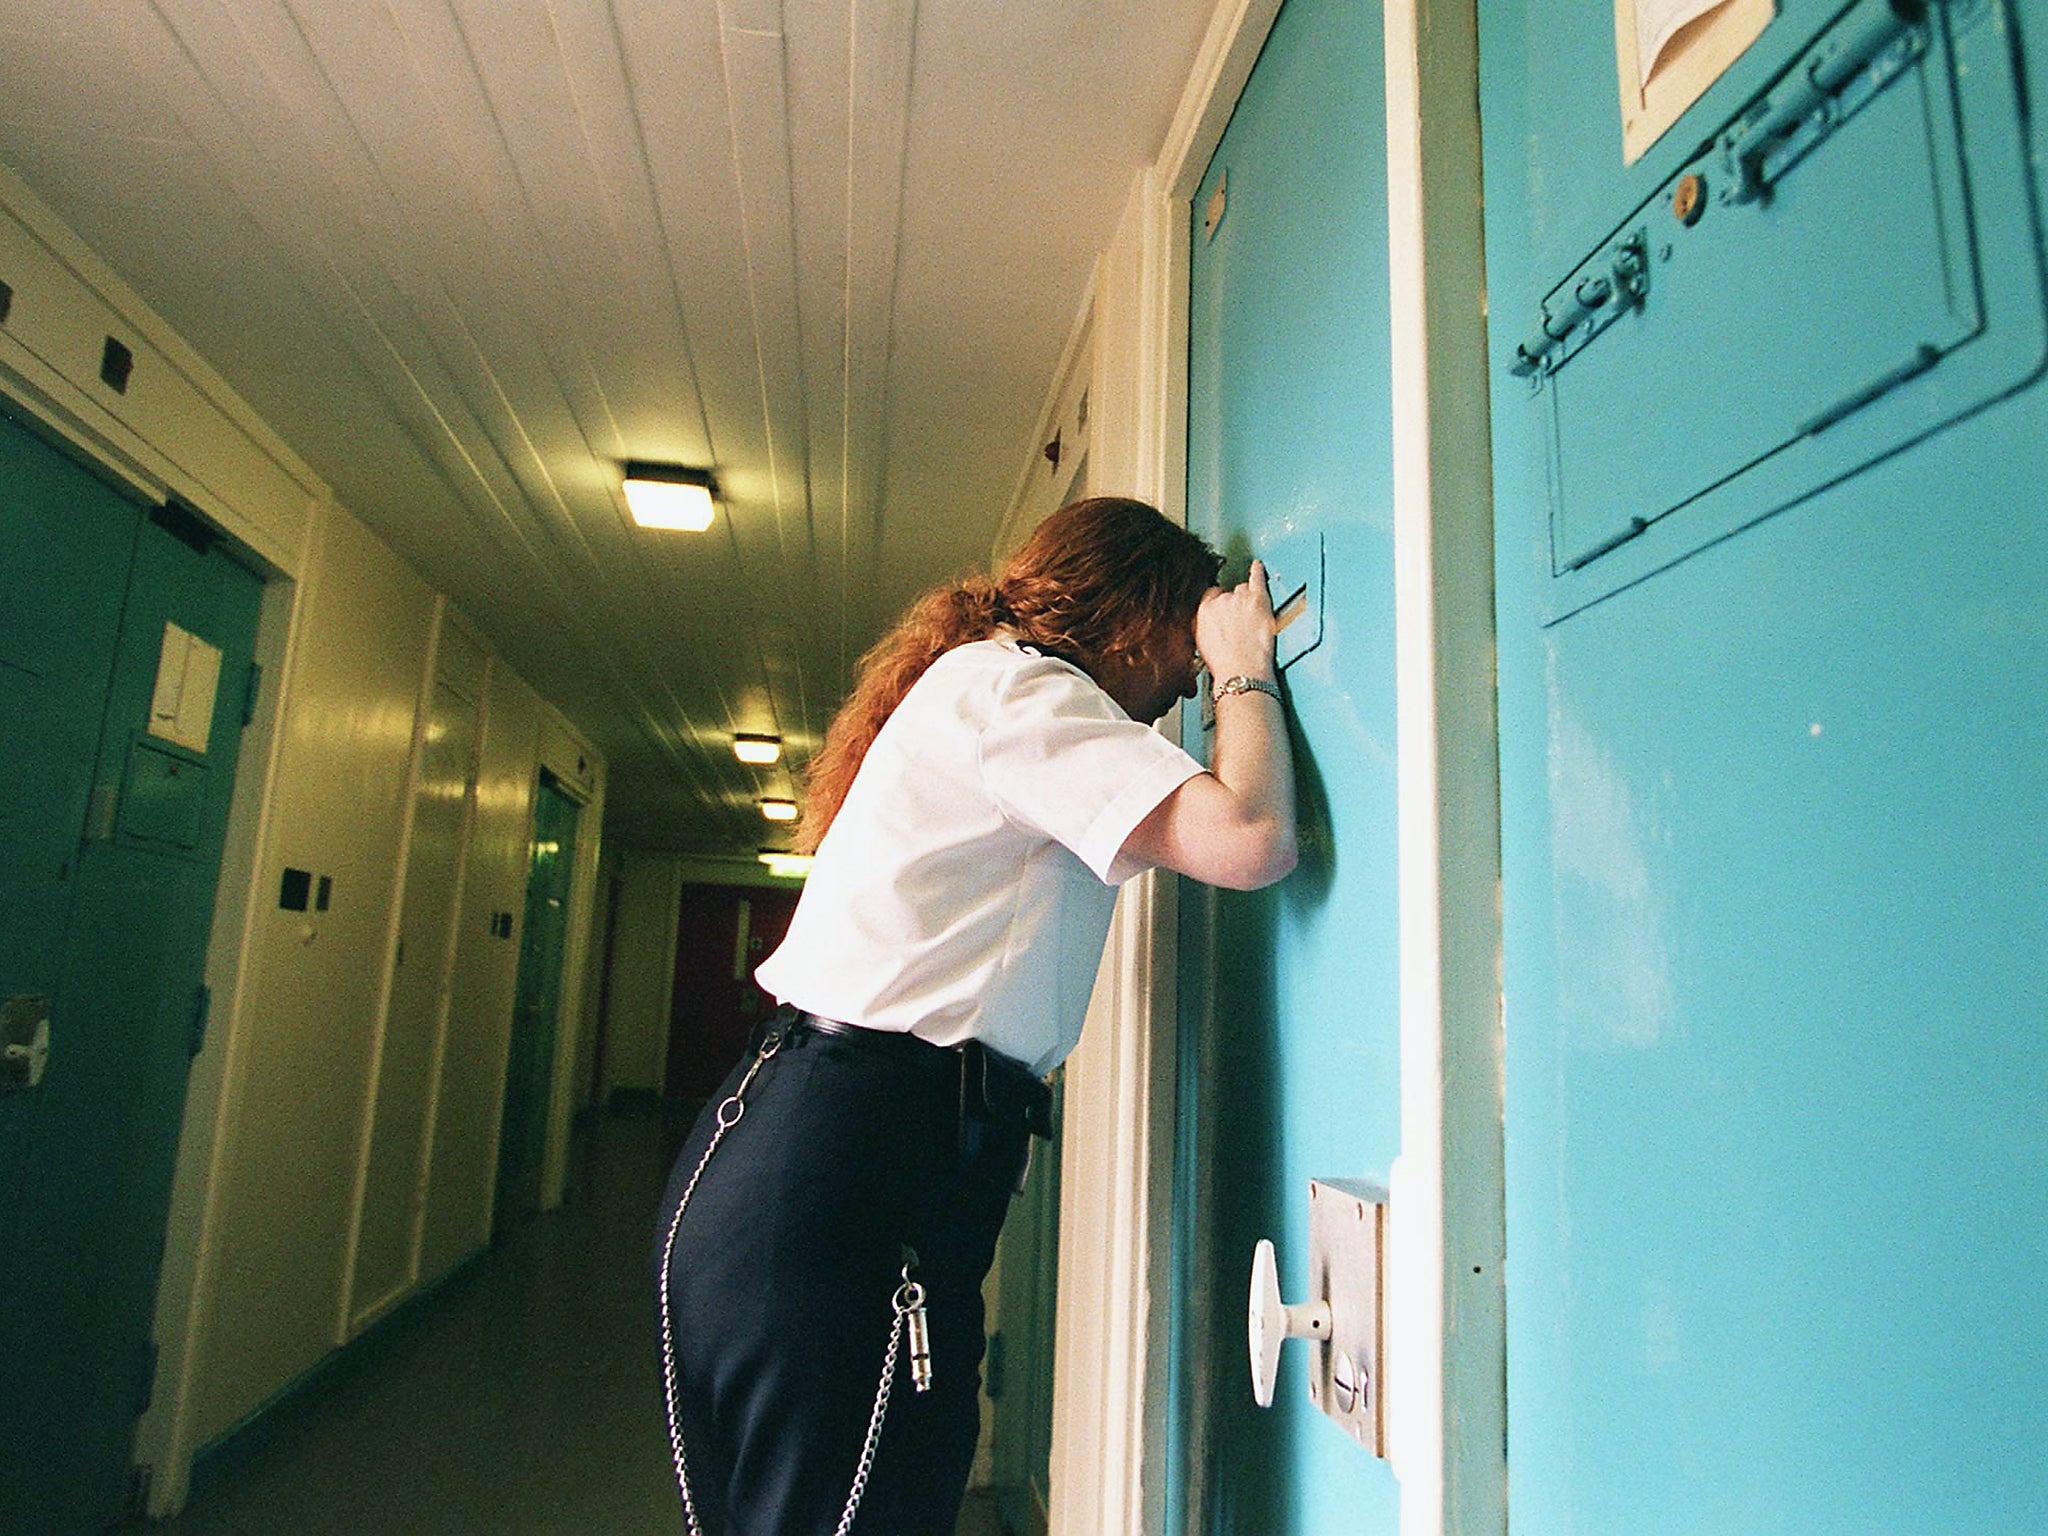 Prison officers are being sought for behaviour roles with young people